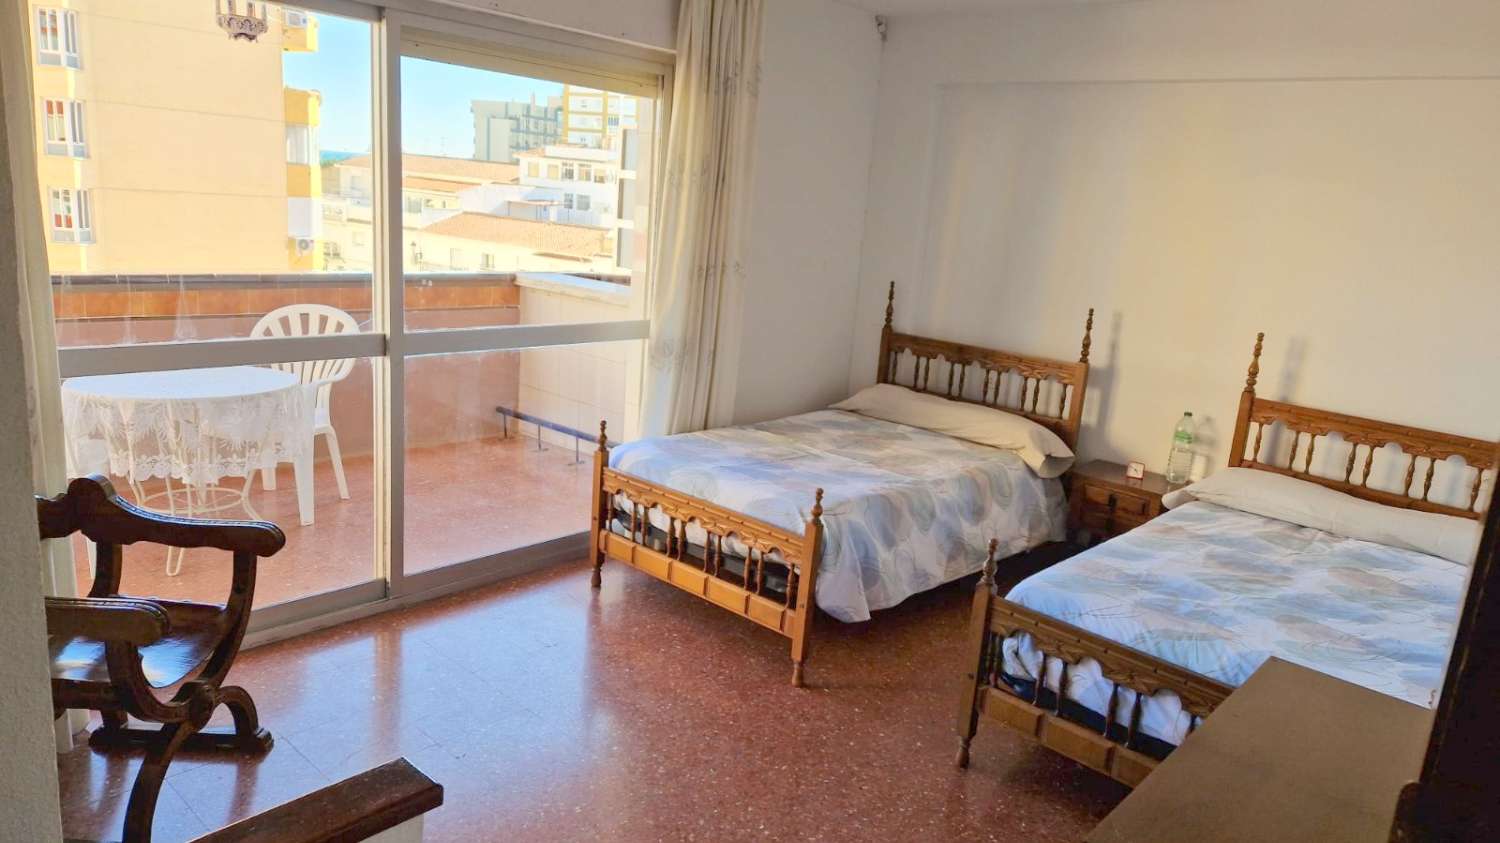 Flat for sale in Centro (Torre del Mar)